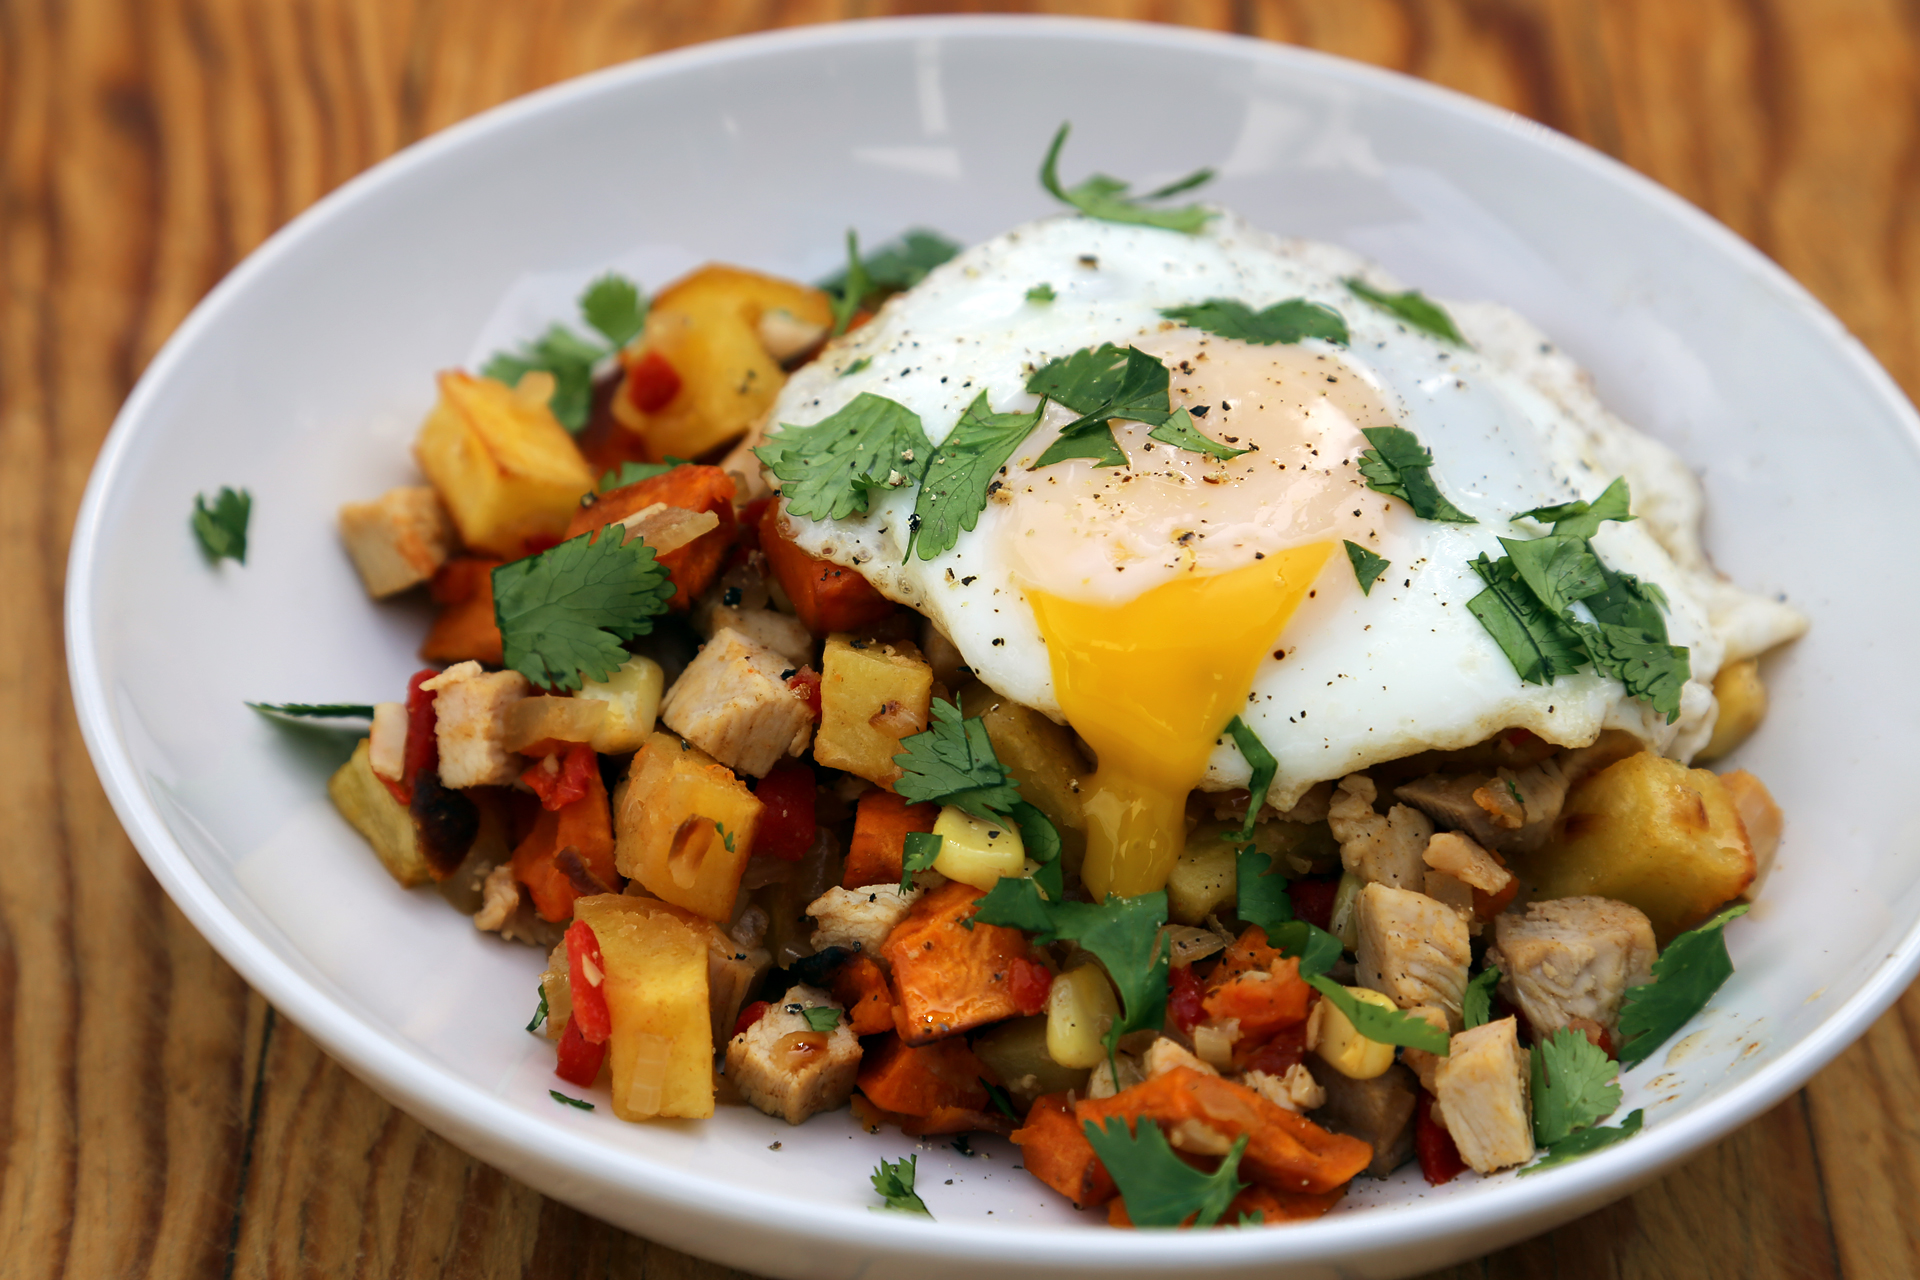 Serve the hash topped with a fried egg.